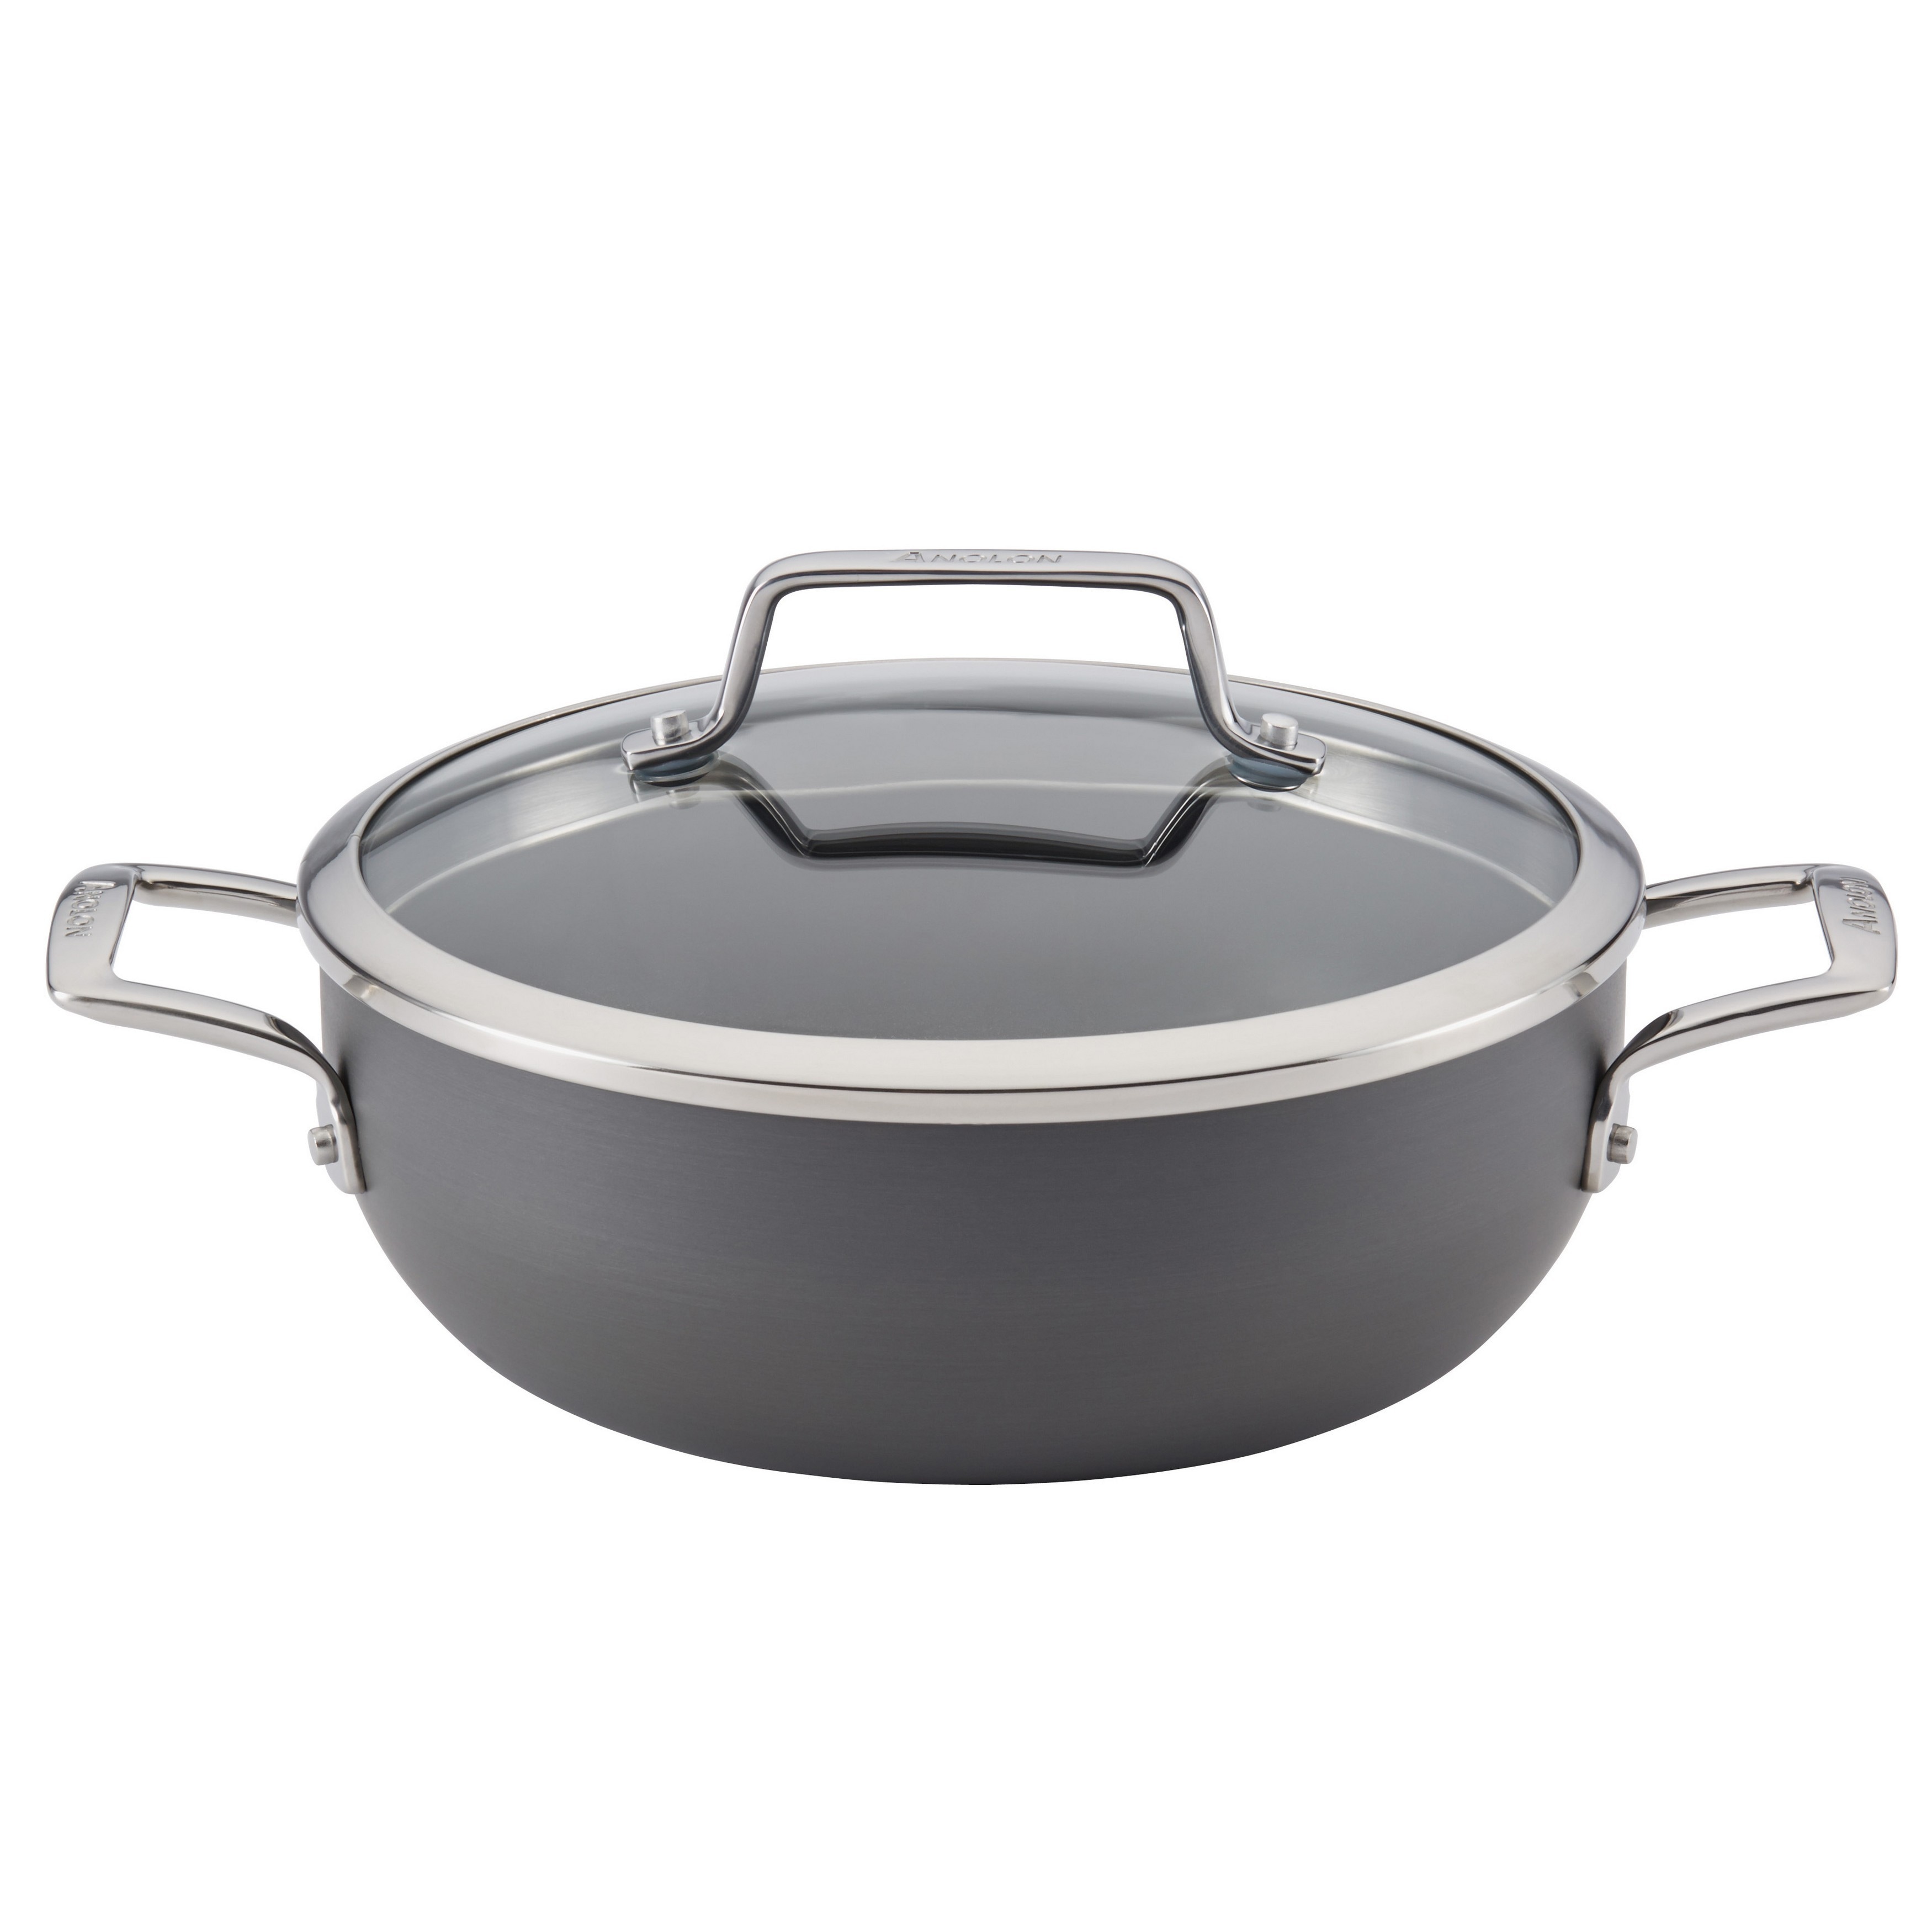 Grey Anolon Advanced Hard-Anodized Nonstick 3.5-Quart Covered Chefs